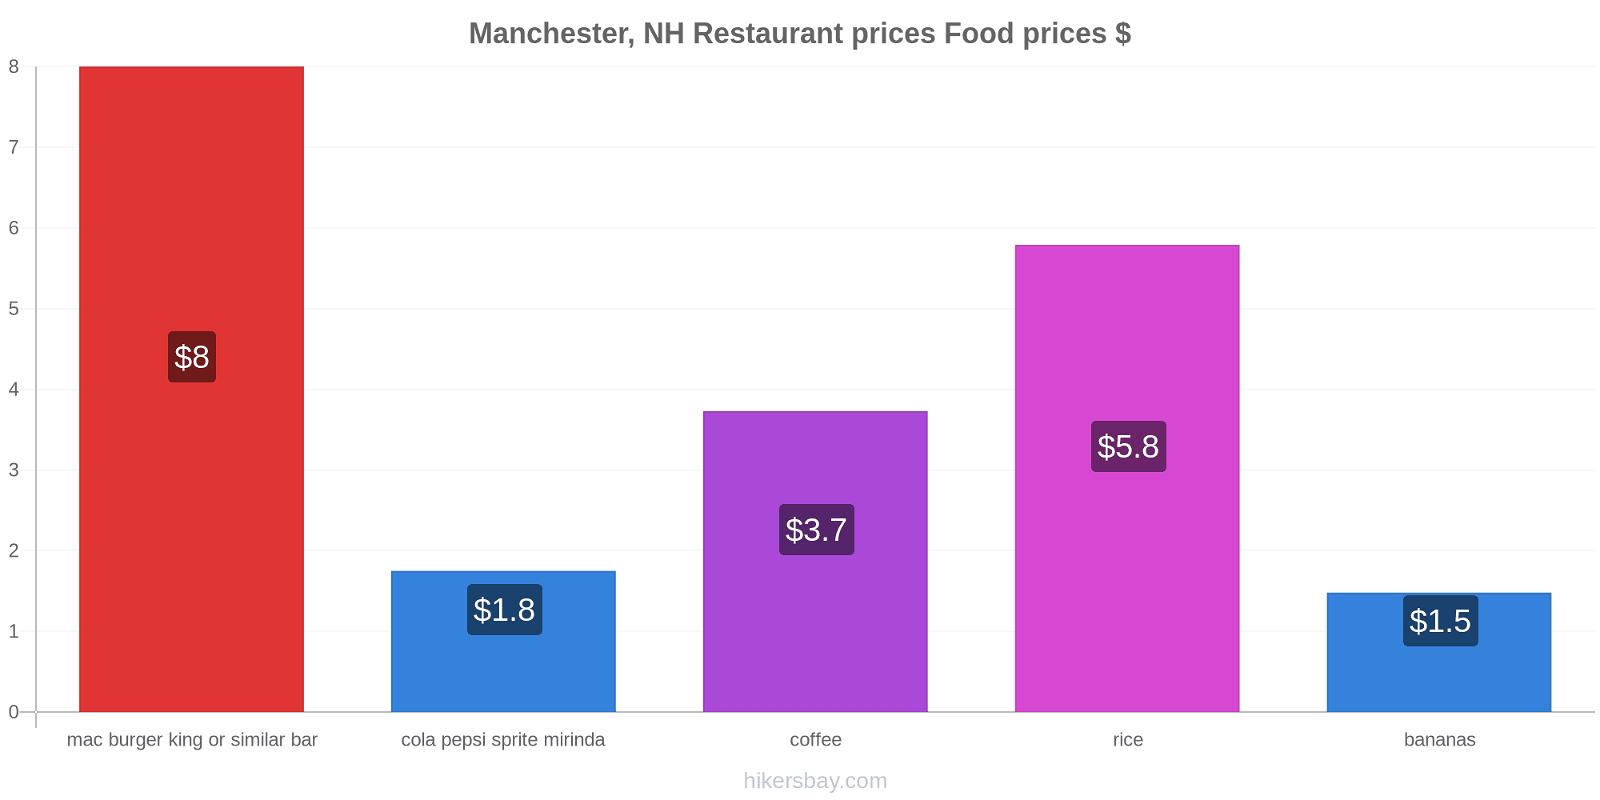 Manchester, NH price changes hikersbay.com